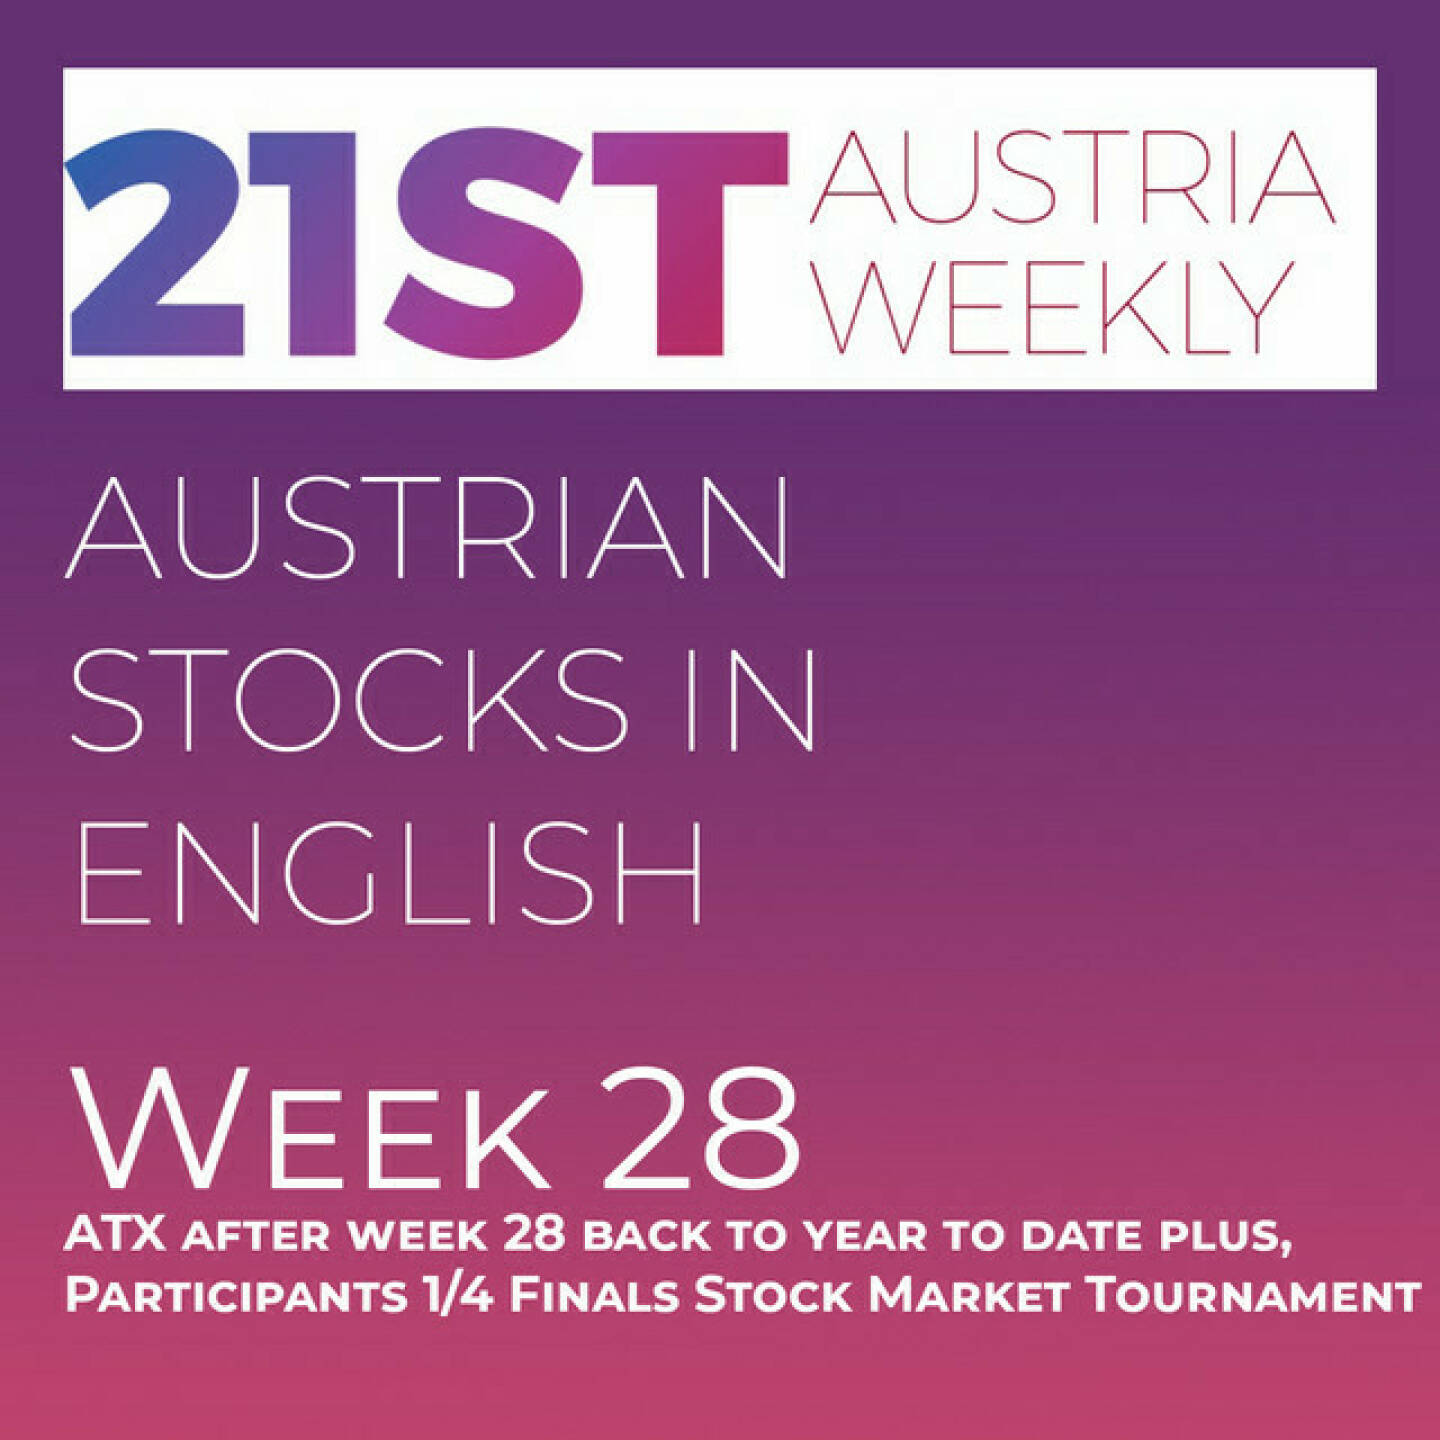 https://open.spotify.com/episode/34uL3em6H7Da9ddYqcLalb
Austrian Stocks in English: ATX after week 28 back to year to date plus, Participants 1/4 Finals Stock Market Tournament - <p>Welcome  to &#34;Austrian Stocks in English - presented by Palfinger&#34;, the english spoken weekly Summary for the Austrian Stock Market,  positioned every Sunday in the mostly german languaged Podcast &#34;Audio-CD.at Indie Podcasts&#34;- Wiener Börse, Sport Musik und Mehr“ .<br/><br/>The following script is based on our 21st Austria weekly and week 28 was a good week for ATX TR which gained 1,88 percent to 6.988,24, ATX is now also back in year to date plus territory. <br/><br/>The Quarterfinals of our 16th Stock Market Tournament next week are Immofinanz vs. RBI, Zumtobel vs. Kontron, CA Immo vs. Frequentis an S Immo vs. Do&amp;Co. <br/><br/>News came from OMV, RHI Magnesita, Andritz, S Immo/Immofinanz, voestalpine, A1 Telekom Austria, Agrana, Marinomed, Vienna Airport, Palfinger, Porr and OMV.<br/><br/><a href=http://www.boerse-social.com/tournament target=_blank>http://www.boerse-social.com/tournament</a><br/><br/><a href=https://boerse-social.com/21staustria target=_blank>https://boerse-social.com/21staustria</a><br/><br/>Please rate my Podcast on Apple Podcasts (or Spotify): <a href=https://podcasts.apple.com/at/podcast/audio-cd-at-indie-podcasts-wiener-boerse-sport-musik-und-mehr/id1484919130 target=_blank>https://podcasts.apple.com/at/podcast/audio-cd-at-indie-podcasts-wiener-boerse-sport-musik-und-mehr/id1484919130</a> .And please spread the word : <a href=https://www.boerse-social.com/21staustria target=_blank>https://www.boerse-social.com/21staustria</a> - the address to subscribe to the weekly summary as a PDF.</p>